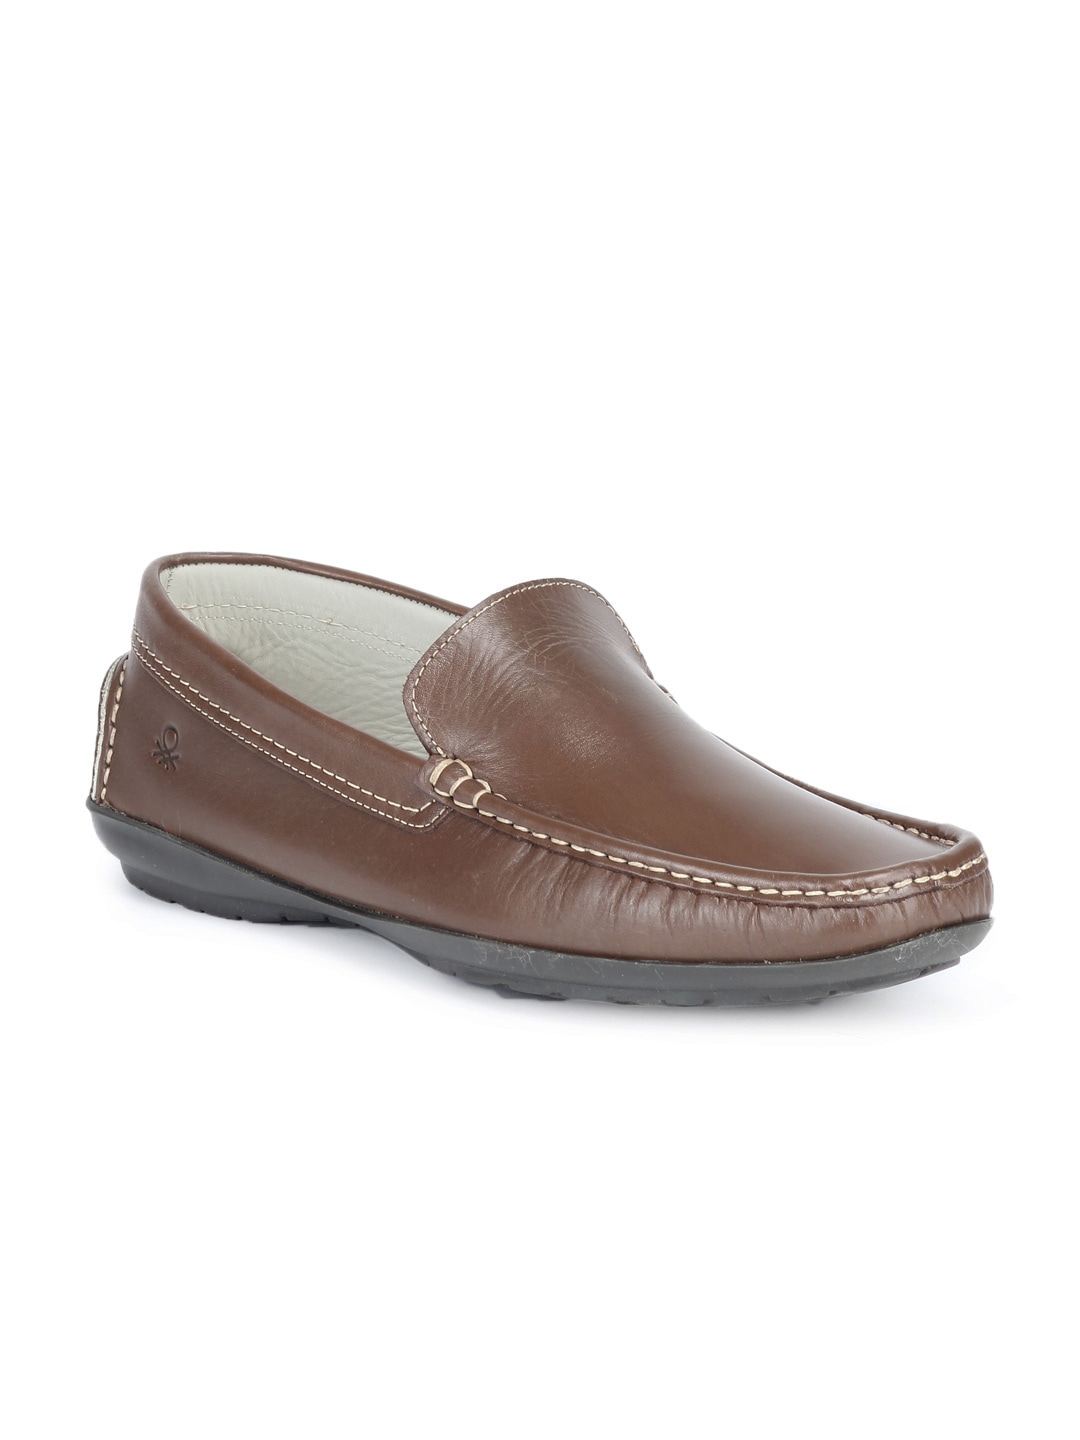 United Colors of Benetton Men Brown Shoes